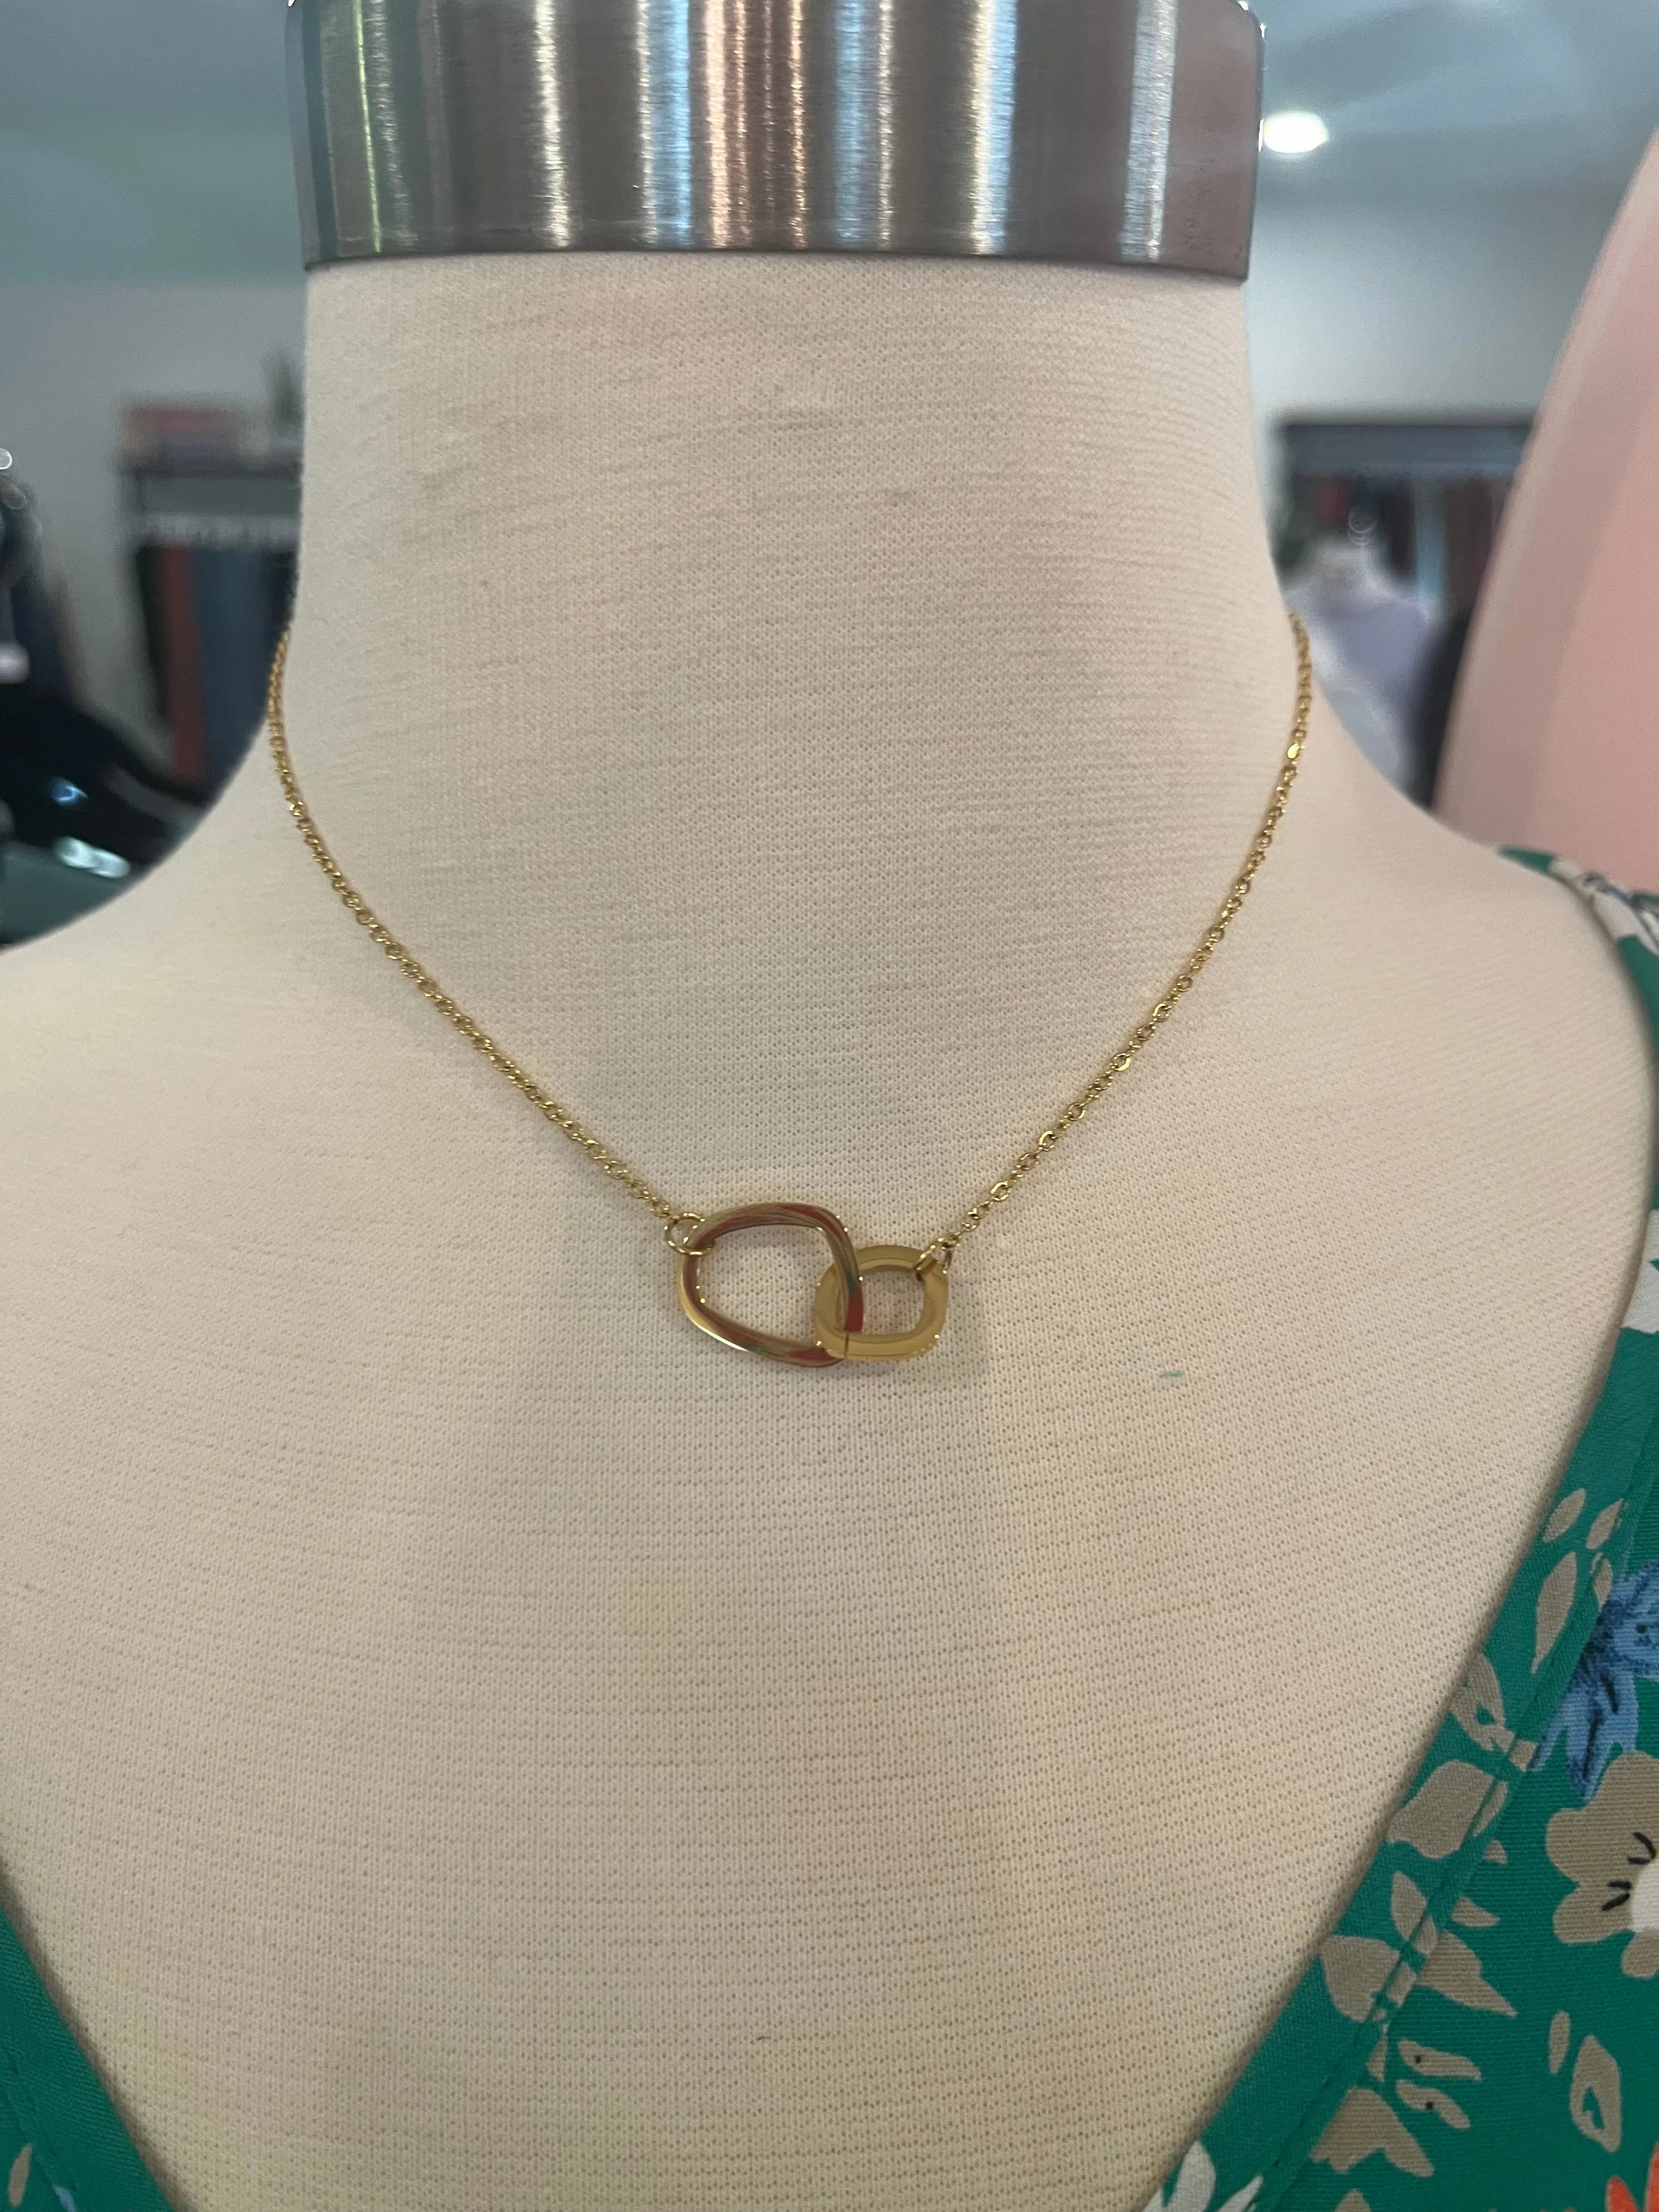 Shop Linked Together Necklace - Waterproof-Necklaces at Ruby Joy Boutique, a Women's Clothing Store in Pickerington, Ohio